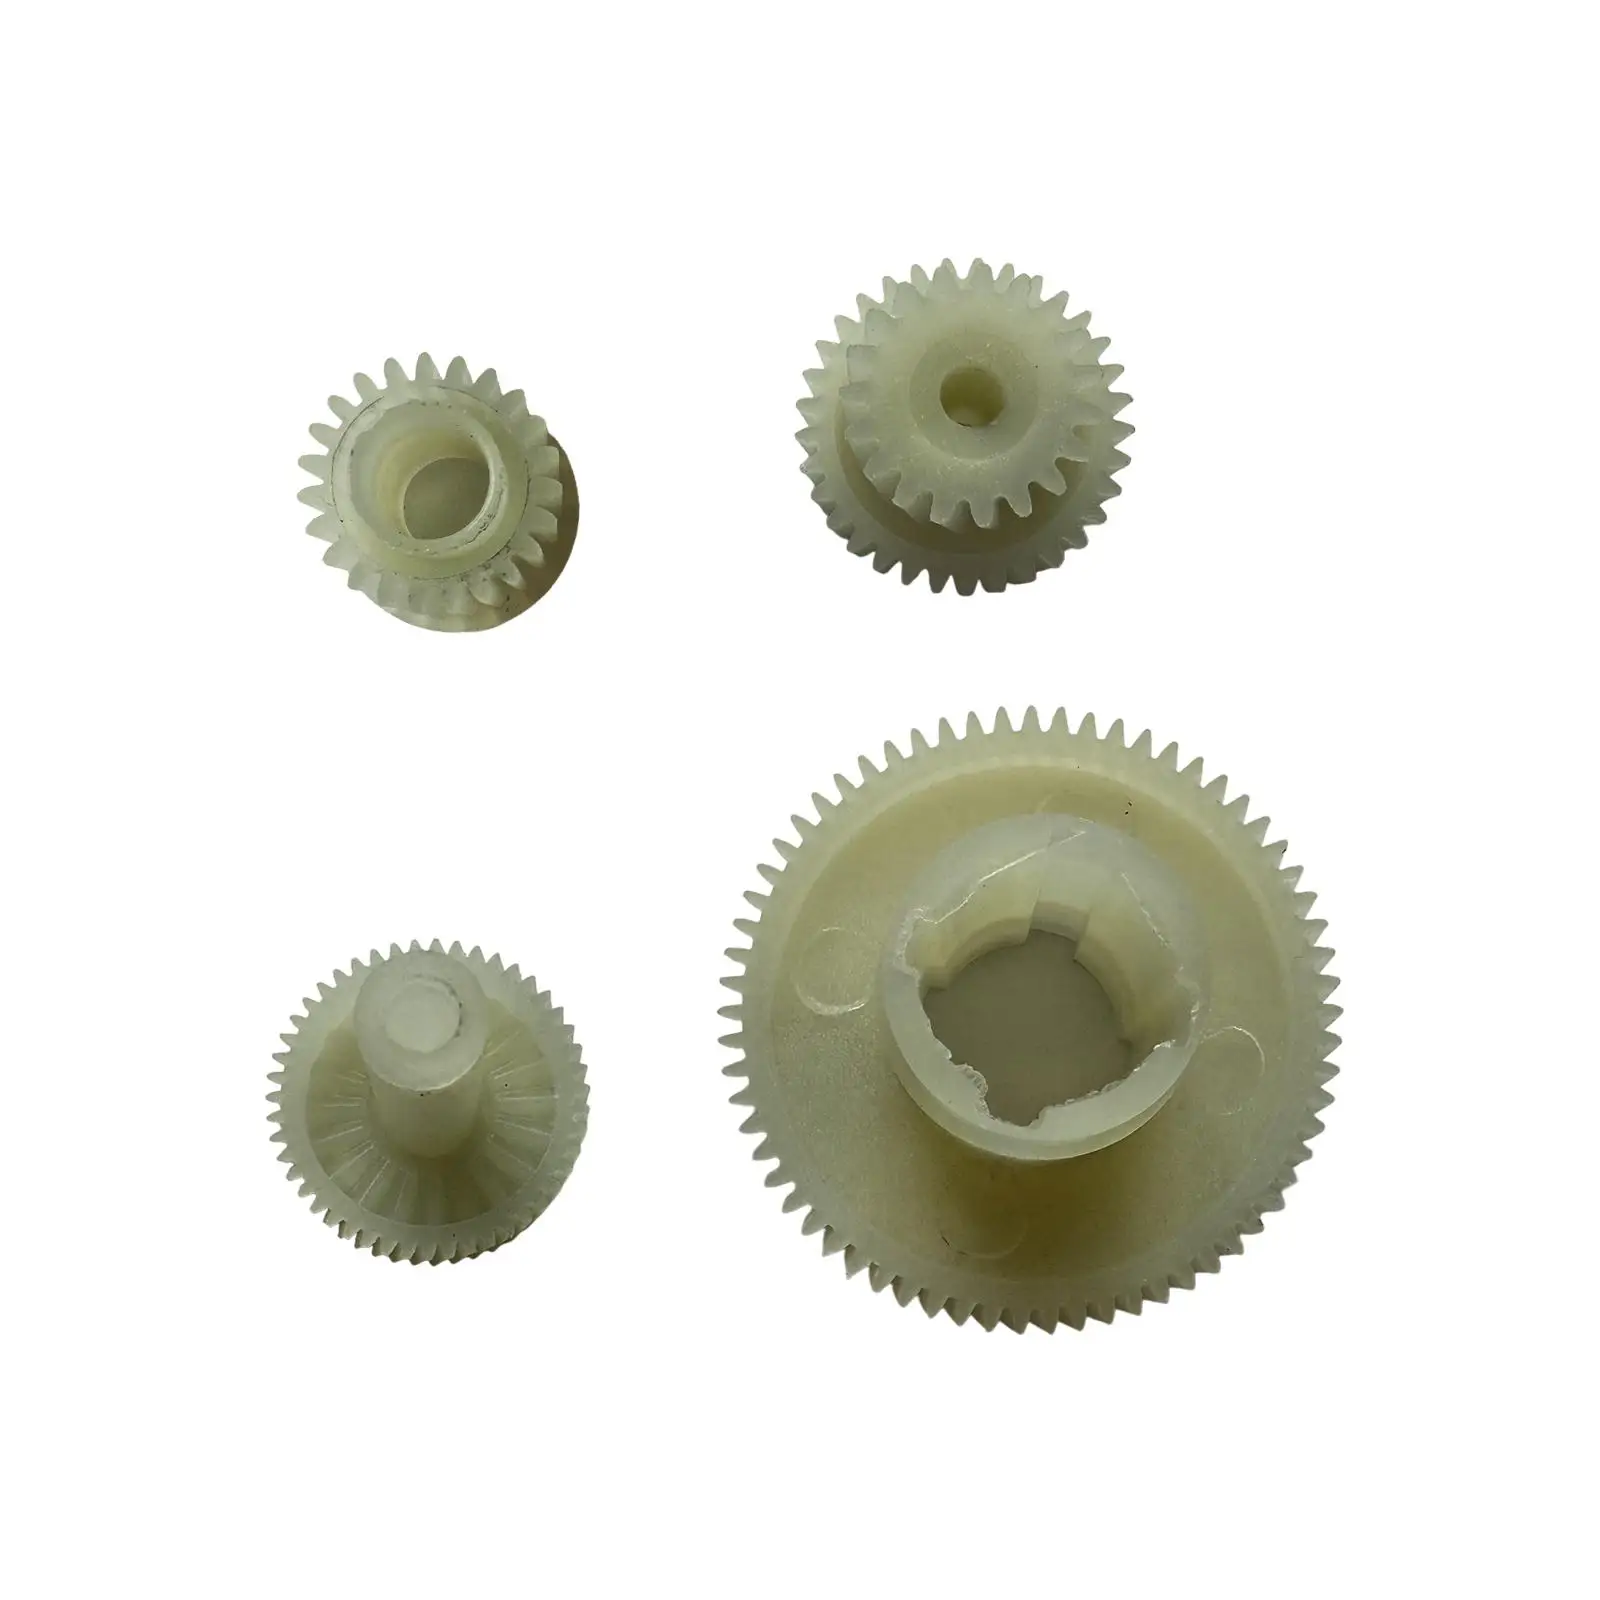 Parking Brake Actuator Repair Gears Durable Directly Replace High Quality for